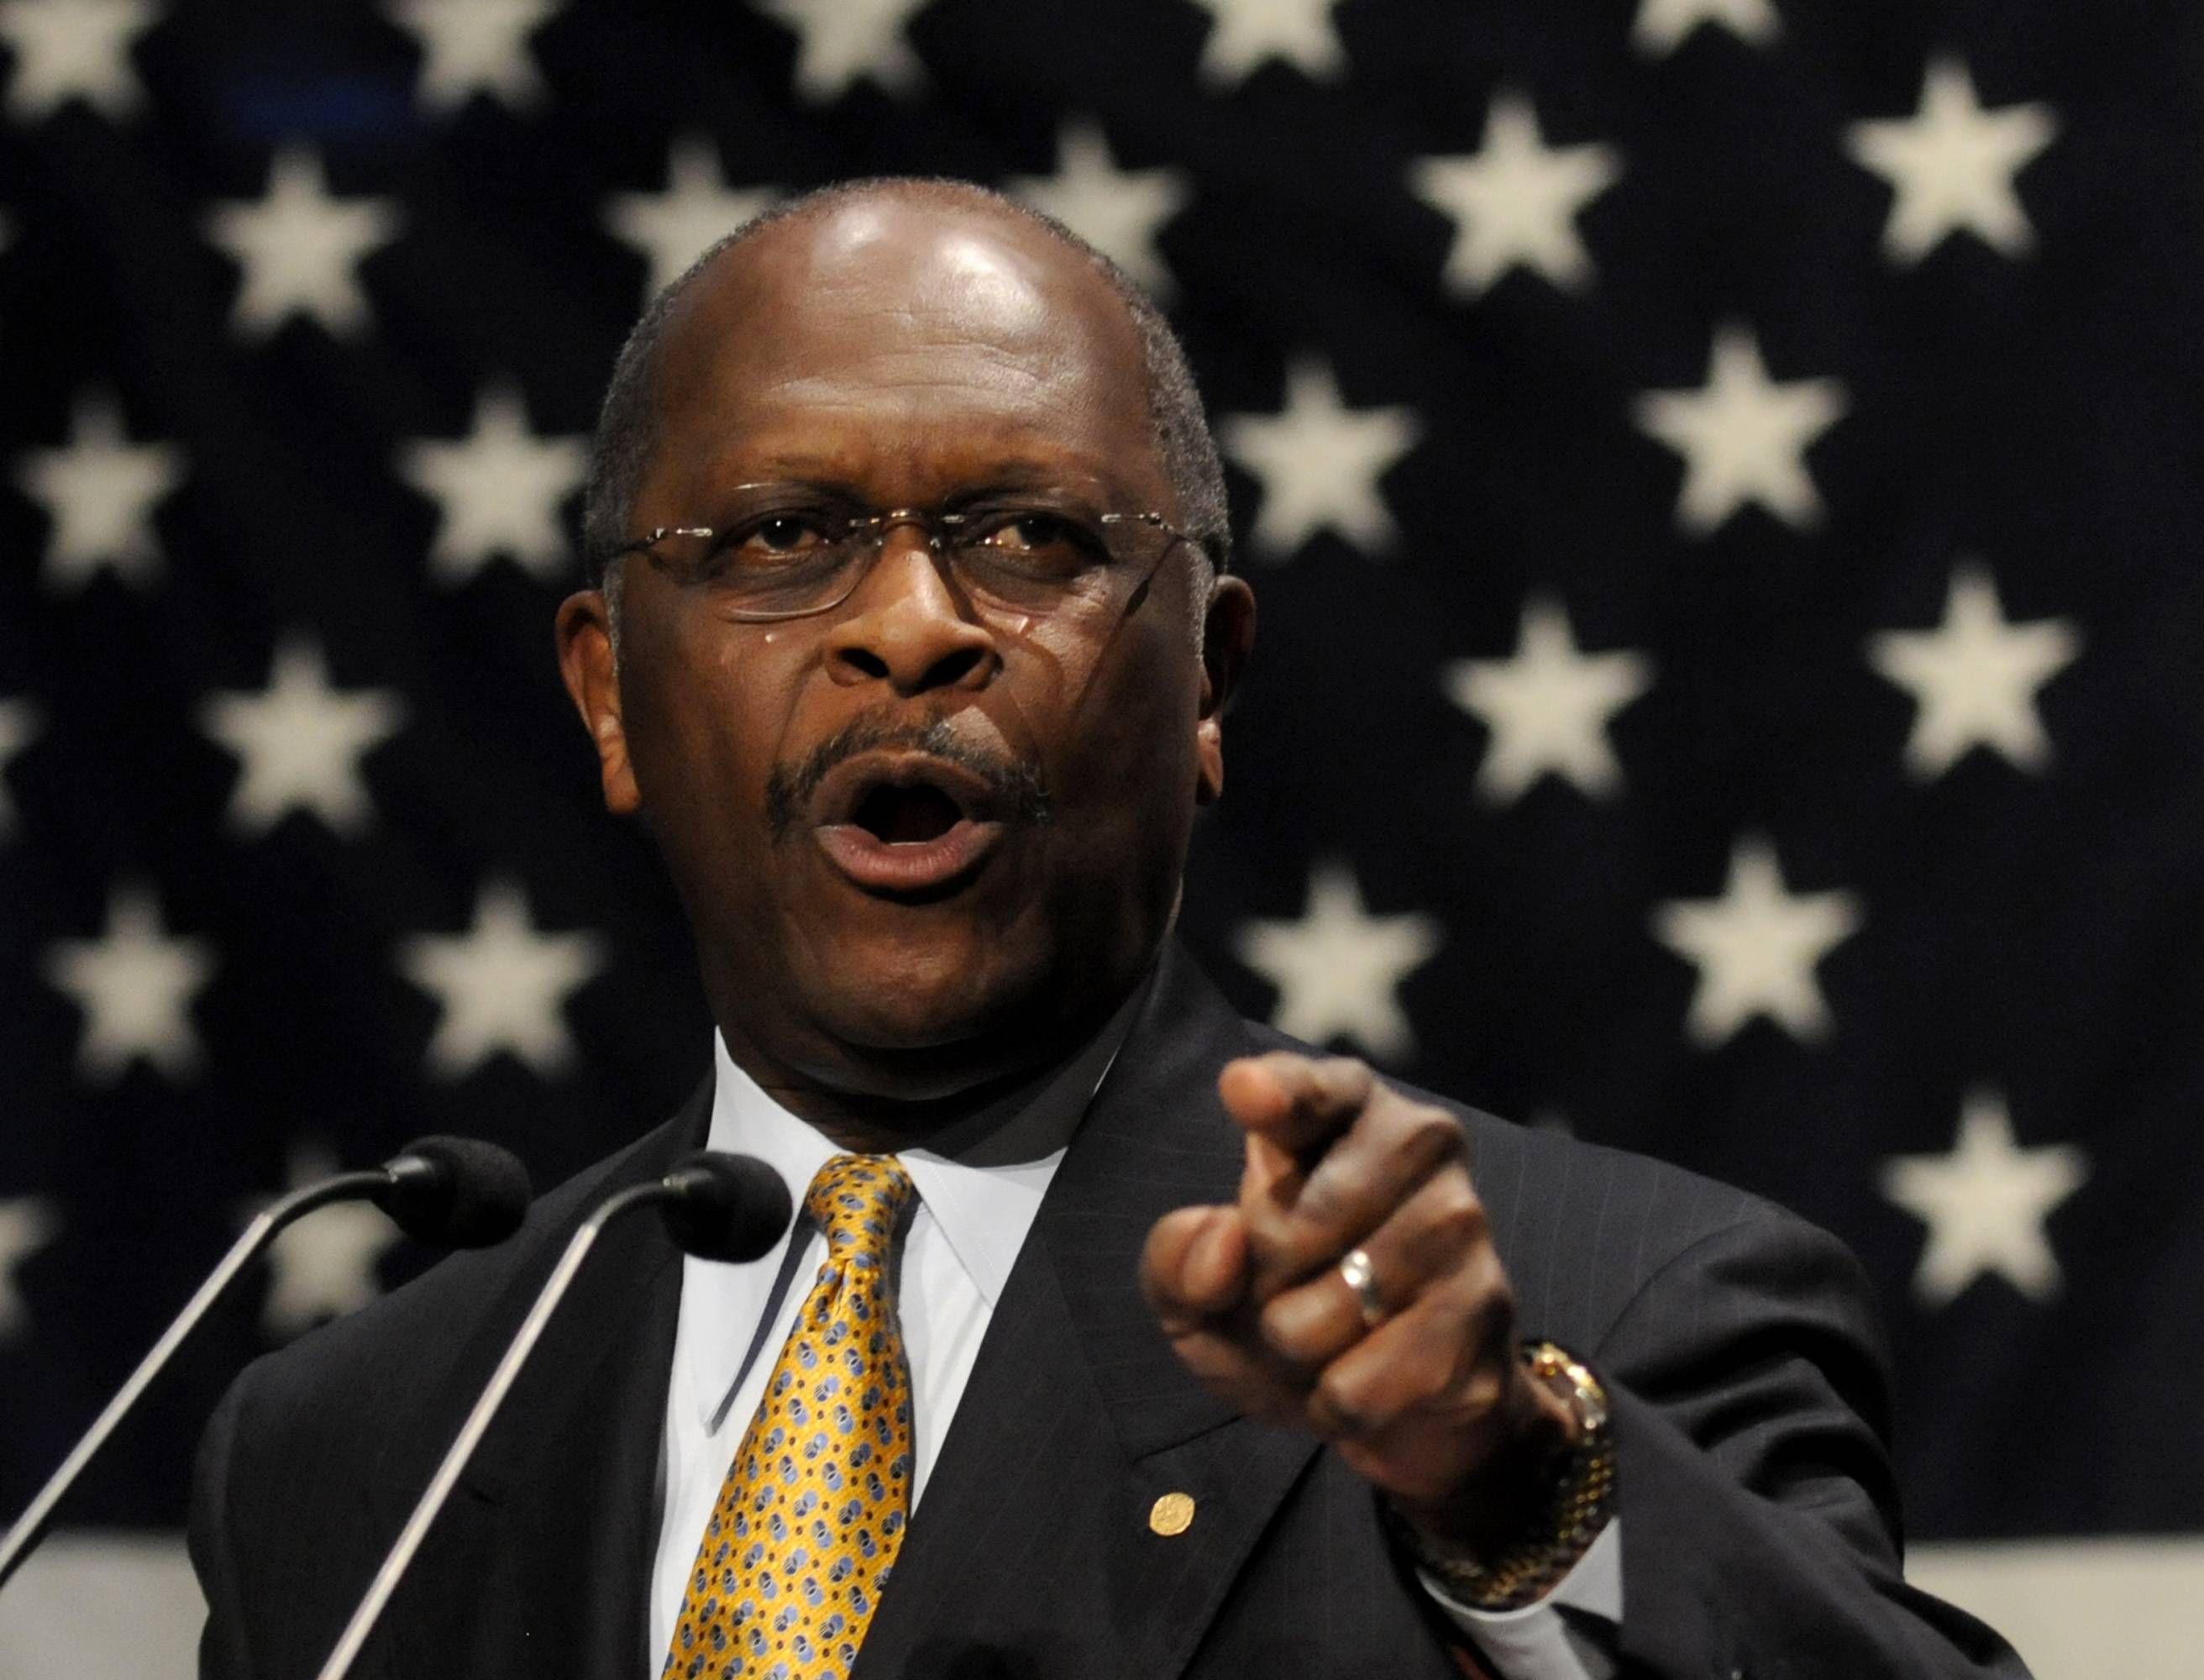 Herman Cain - “I can promise you Casey Anthony and anyone else who I think might’ve killed their children will have no business in a Herman Cain administration. President Cain would look her right in the eyes and ask her point blank if she killed that little girl; we’d get right to the bottom of it.”--GOP presidential candidate Herman Cain(Photo: Steve Pope/Getty Images)